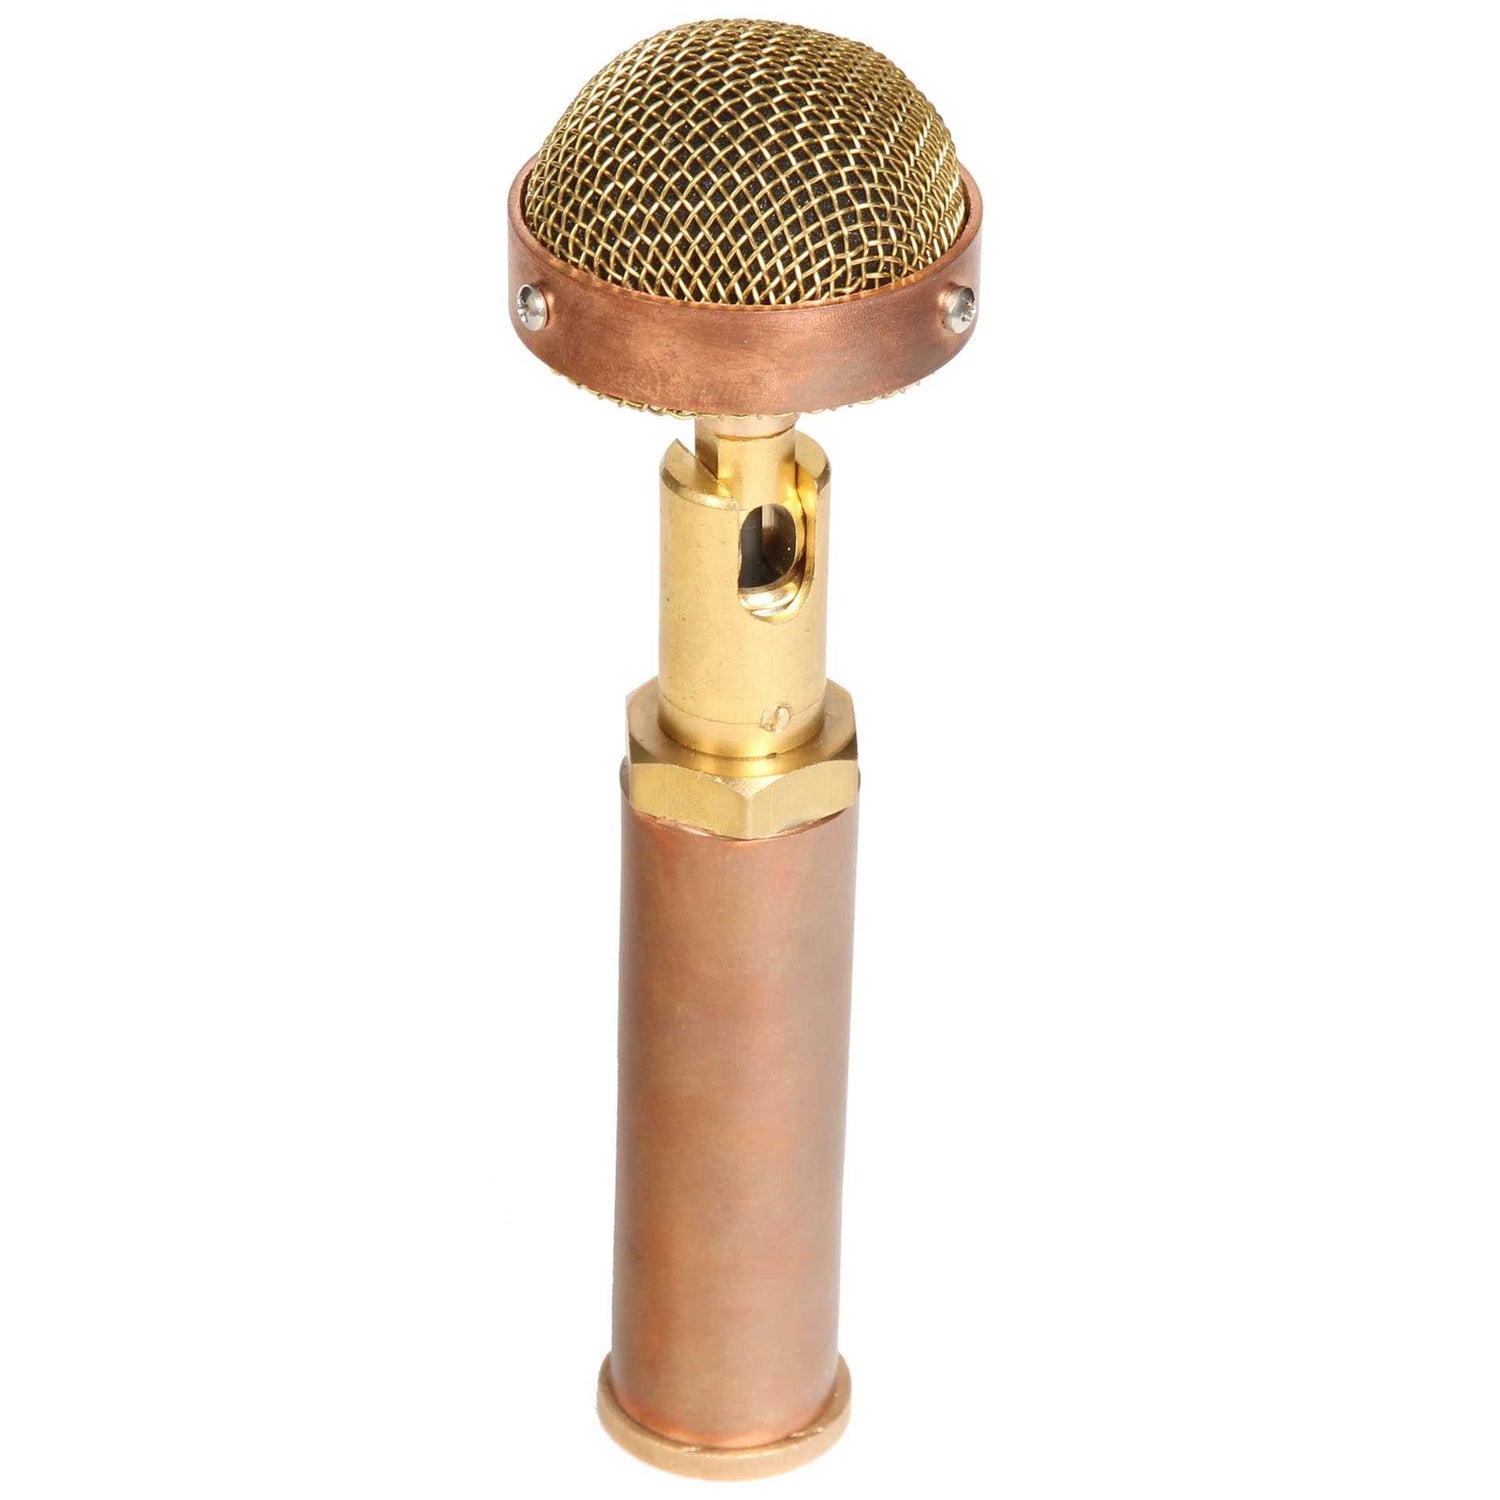 Image 2 of Ear Trumpet Labs Chantelle Condenser Microphone - SKU# CHANTELLE : Product Type Microphones & Accessories : Elderly Instruments